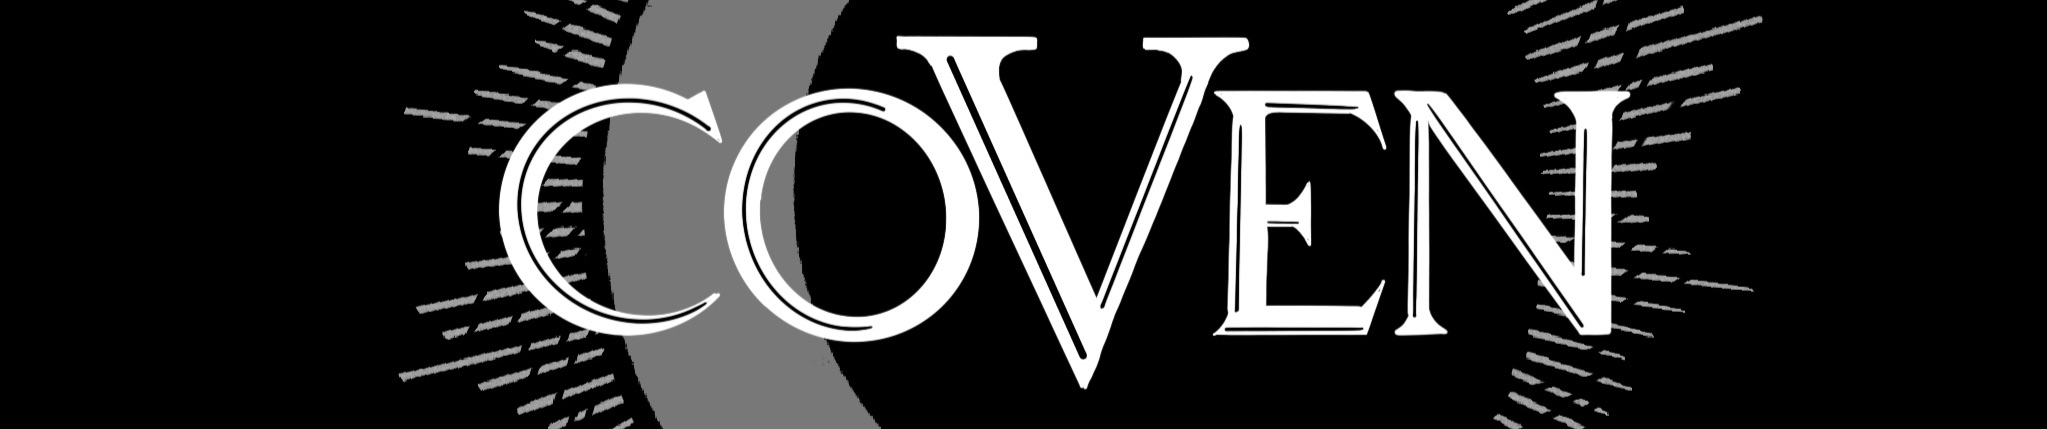 Stream Coven Dove music  Listen to songs, albums, playlists for free on  SoundCloud